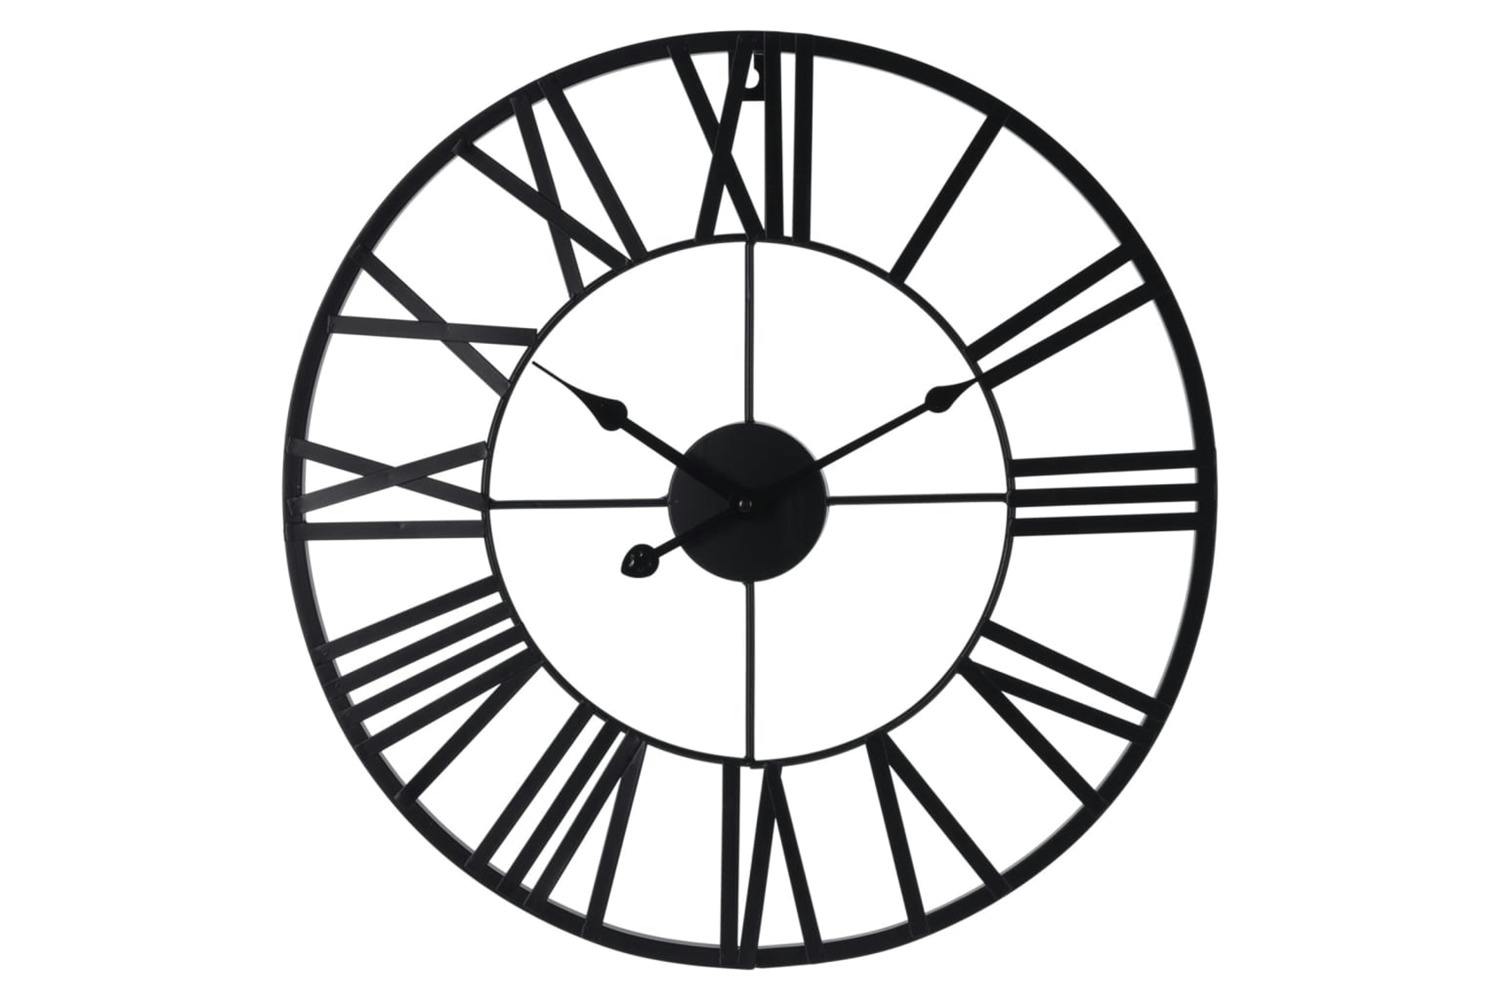 H&s Collection 445871 Wall Clock Roman Number Black